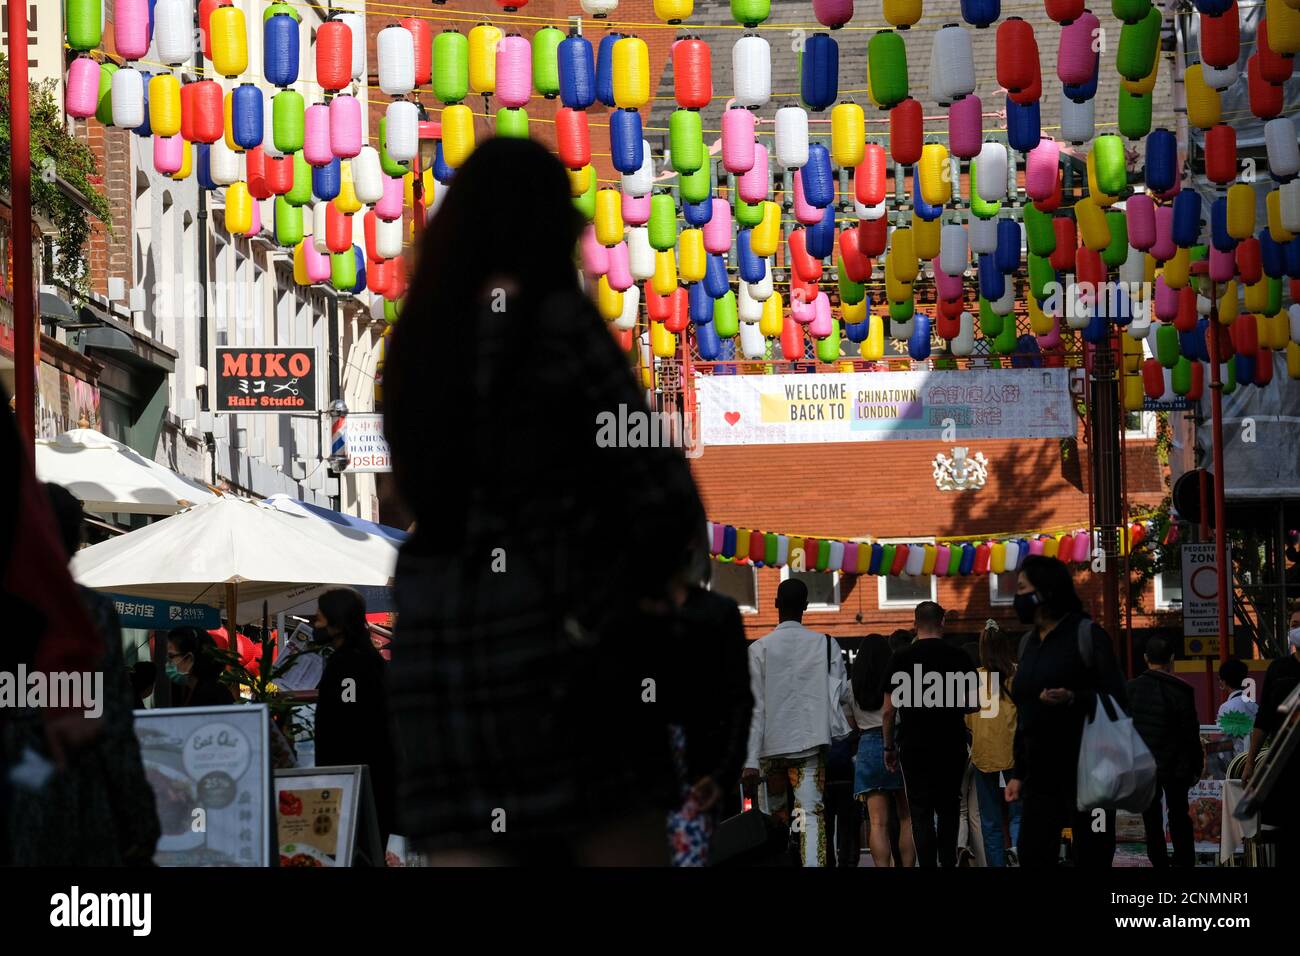 Chinatown, London, UK. 18th September 2020. The Love Chinatown campaign has multi-coloured lanterns replacing the traditional red lanterns as part of the campaign to revitalise the area. Credit: Matthew Chattle/Alamy Live News Stock Photo